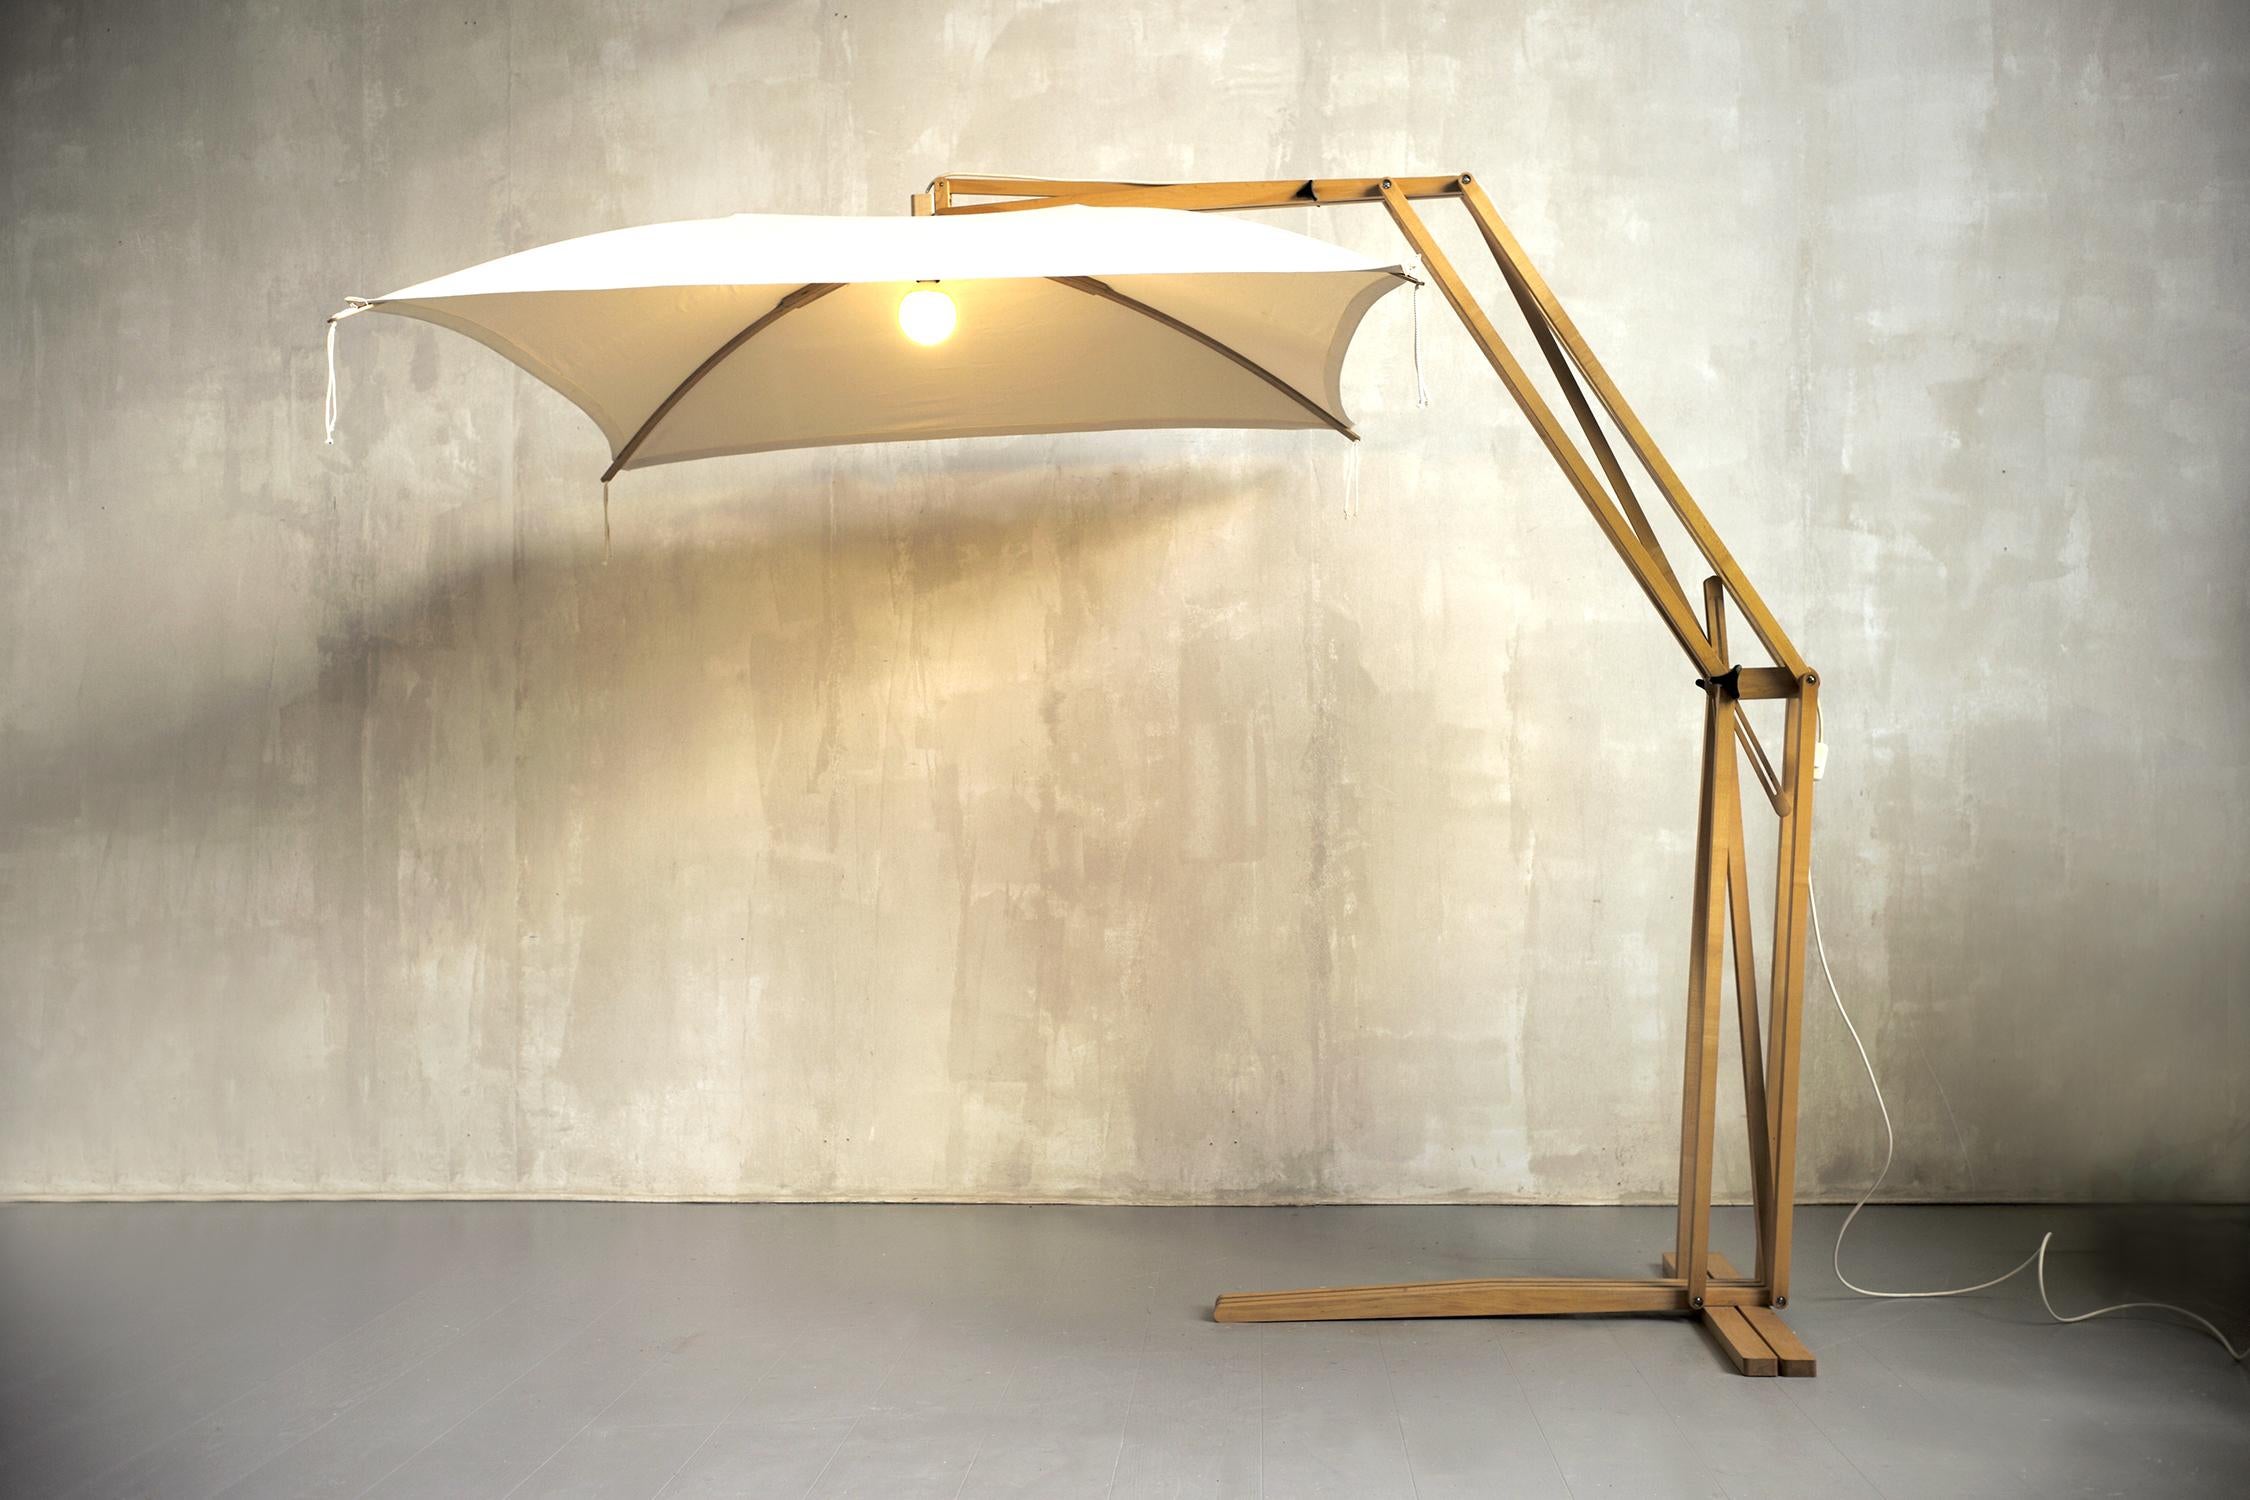 Jean-Claude Duboys, Important floor lamp in satin maple and linen, France 1980. The Parasol floor lamp has joints fitted with brakes, allowing adjustment of the height and orientation of the reflector. Created as part of the Attitude program in the